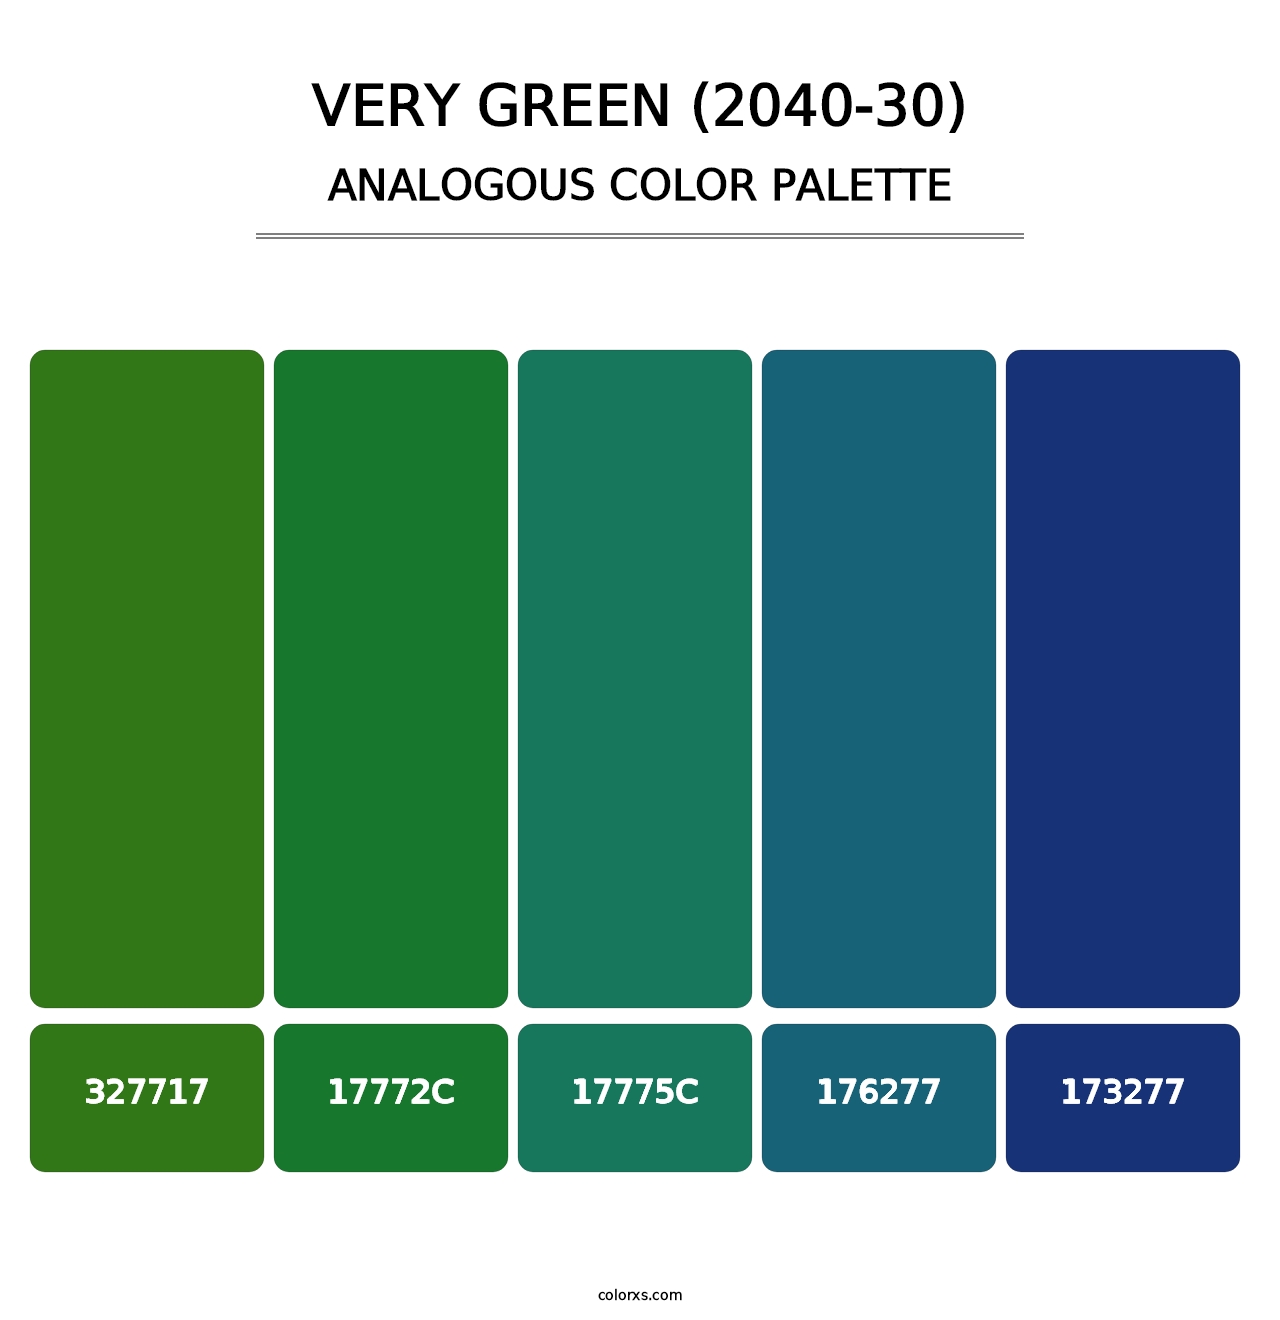 Very Green (2040-30) - Analogous Color Palette